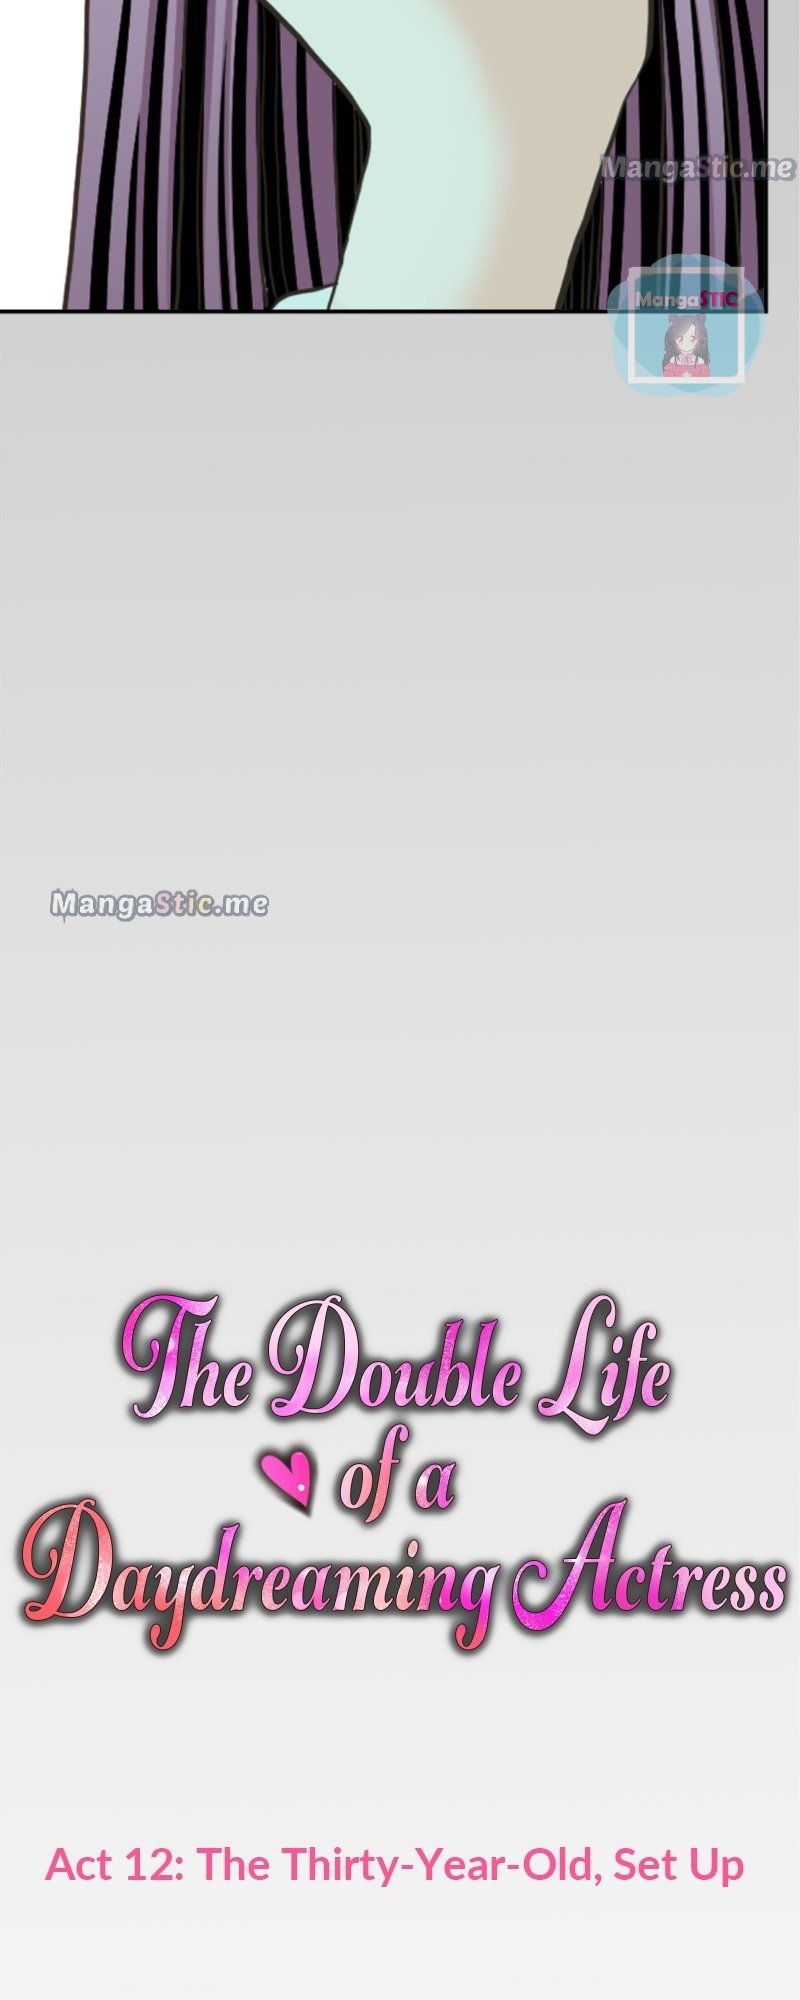 The Double Life of a Daydreaming Actress chapter 12